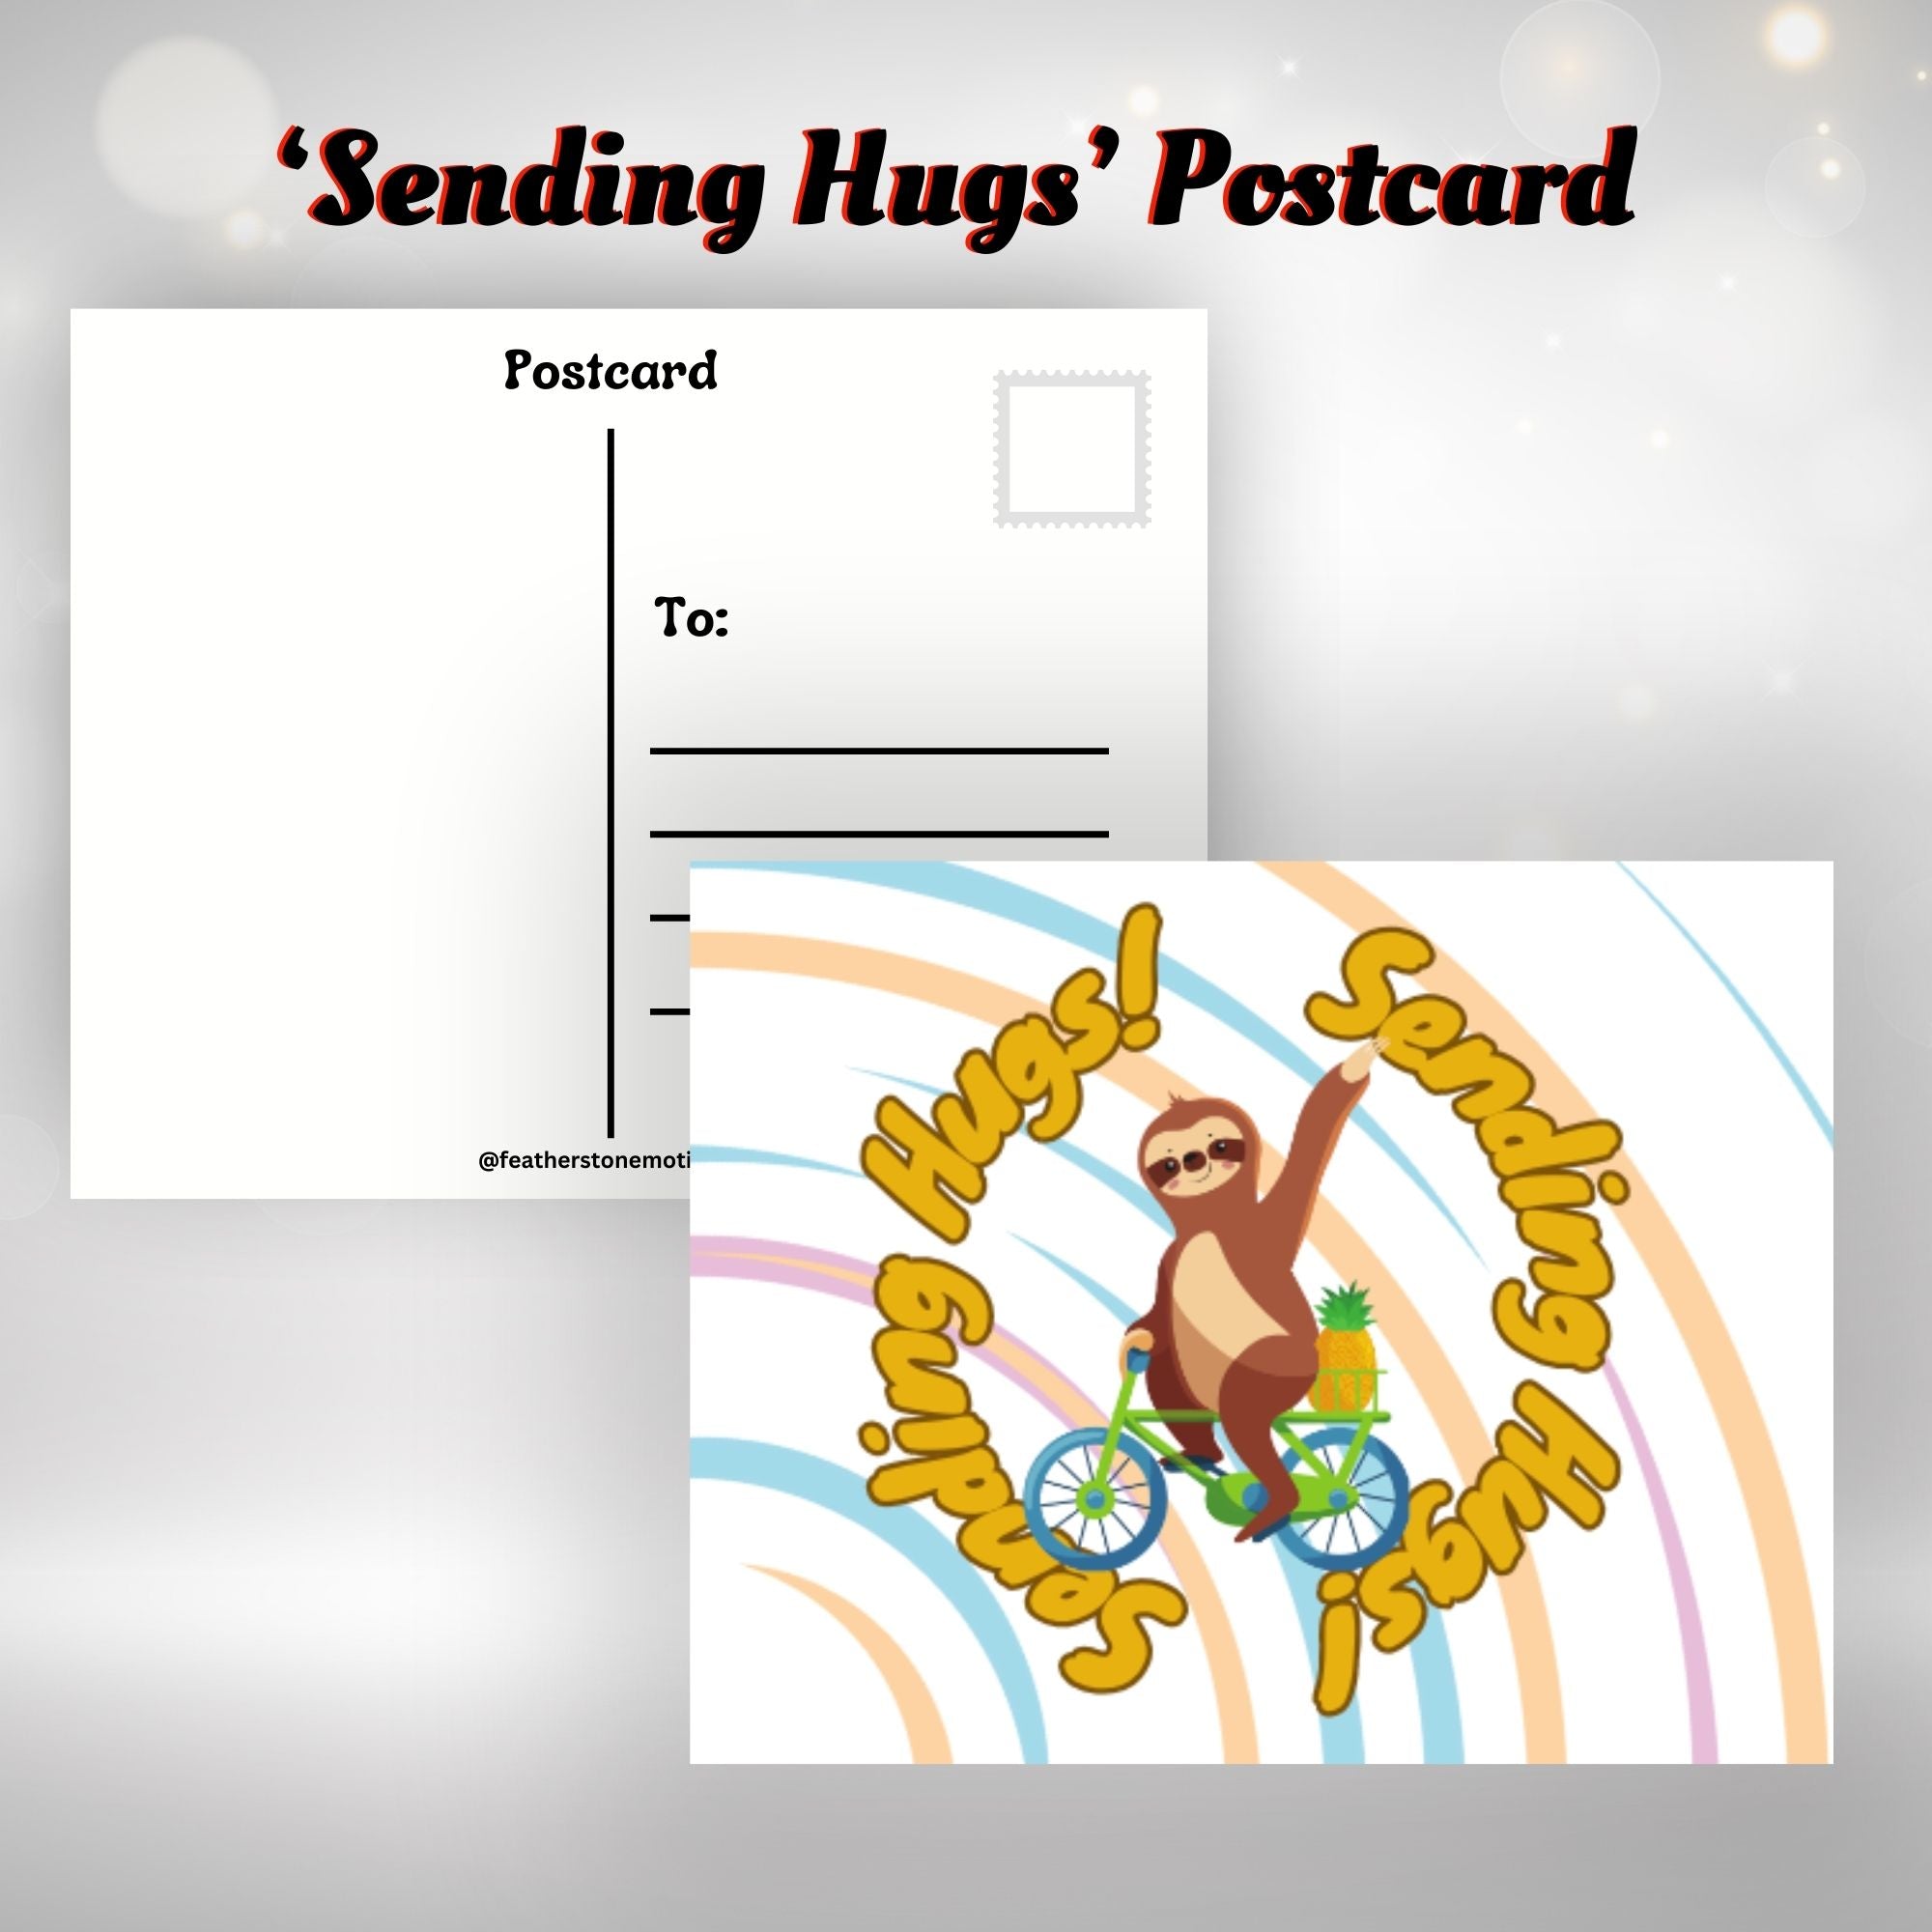 This image shows the Sending Hugs! postcard with a sloth waving and riding a bicycle.